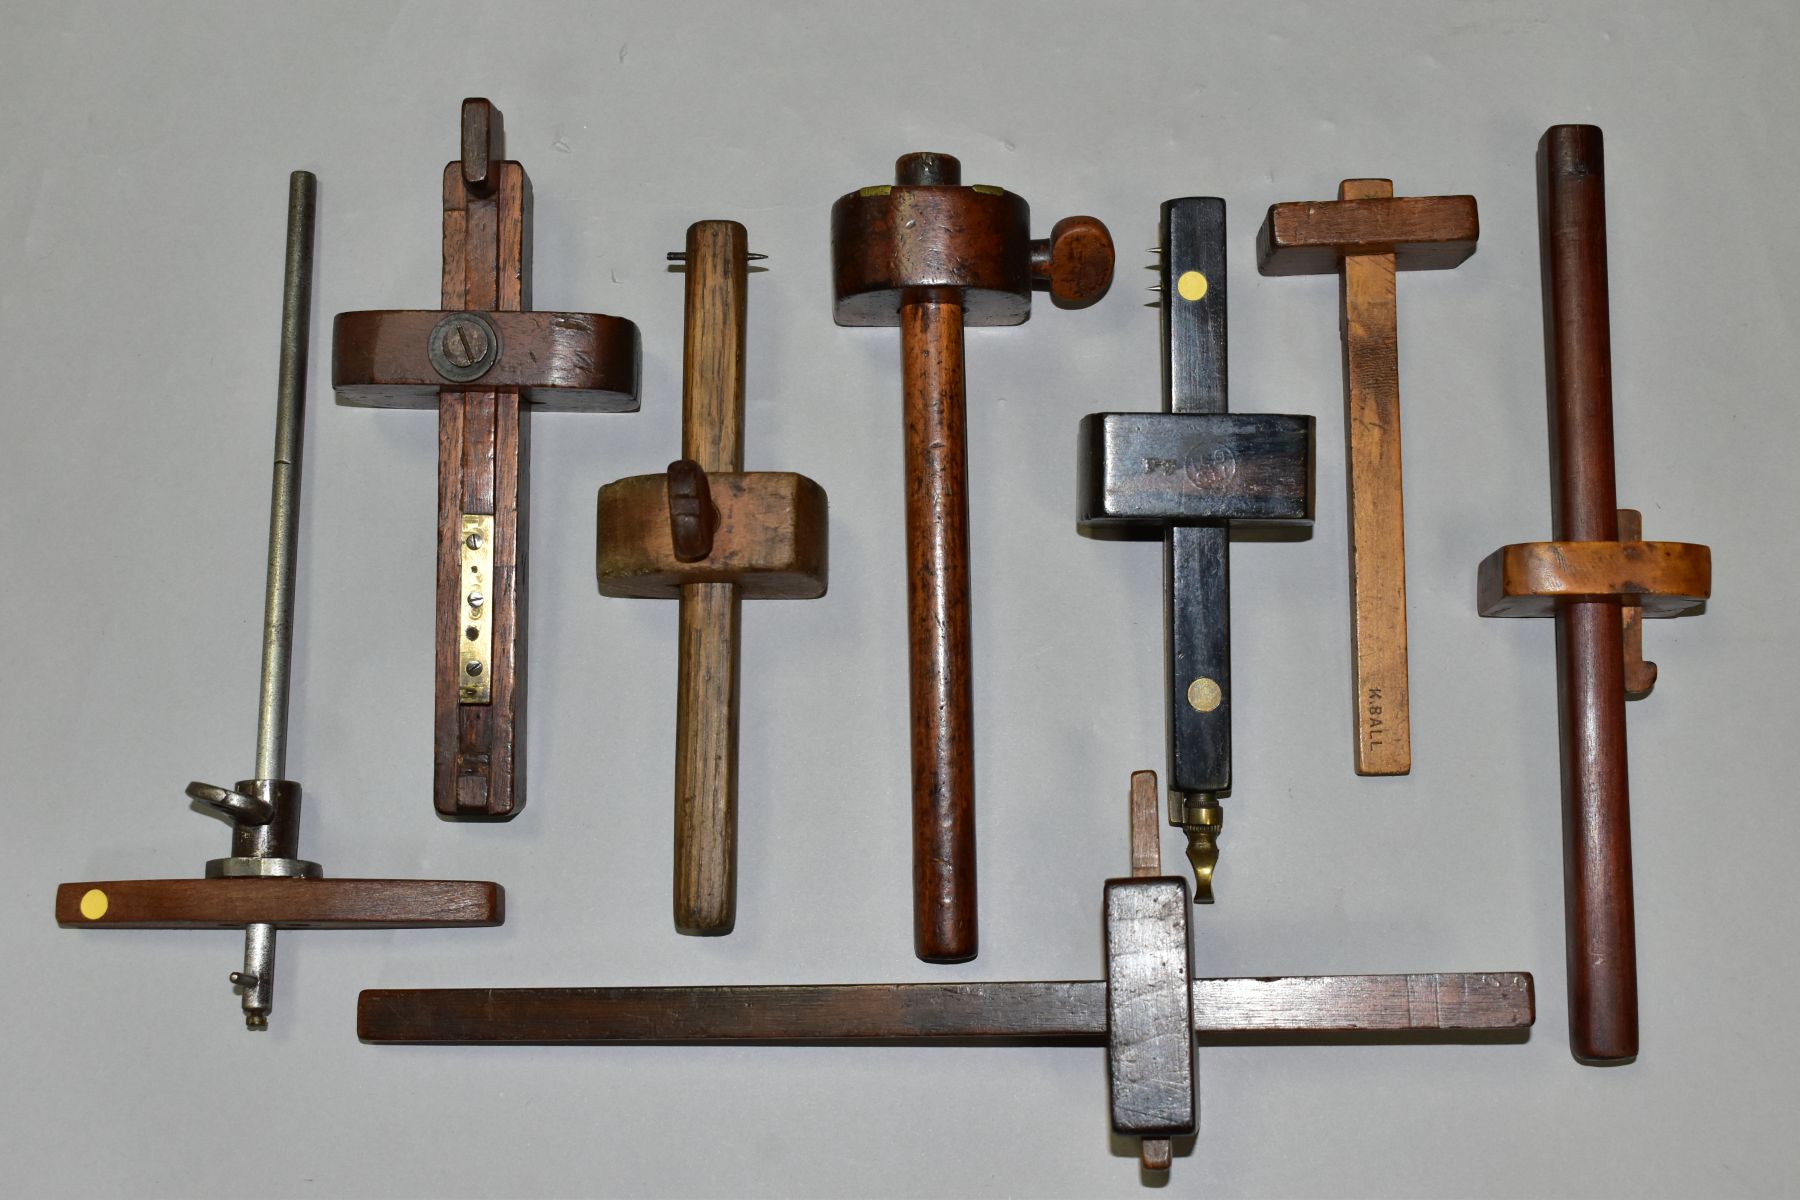 A TRAY CONTAINING EIGHT VINTAGE MARKING AND MORTICE GAUGES, including a Brass and Ebony Mortice, a